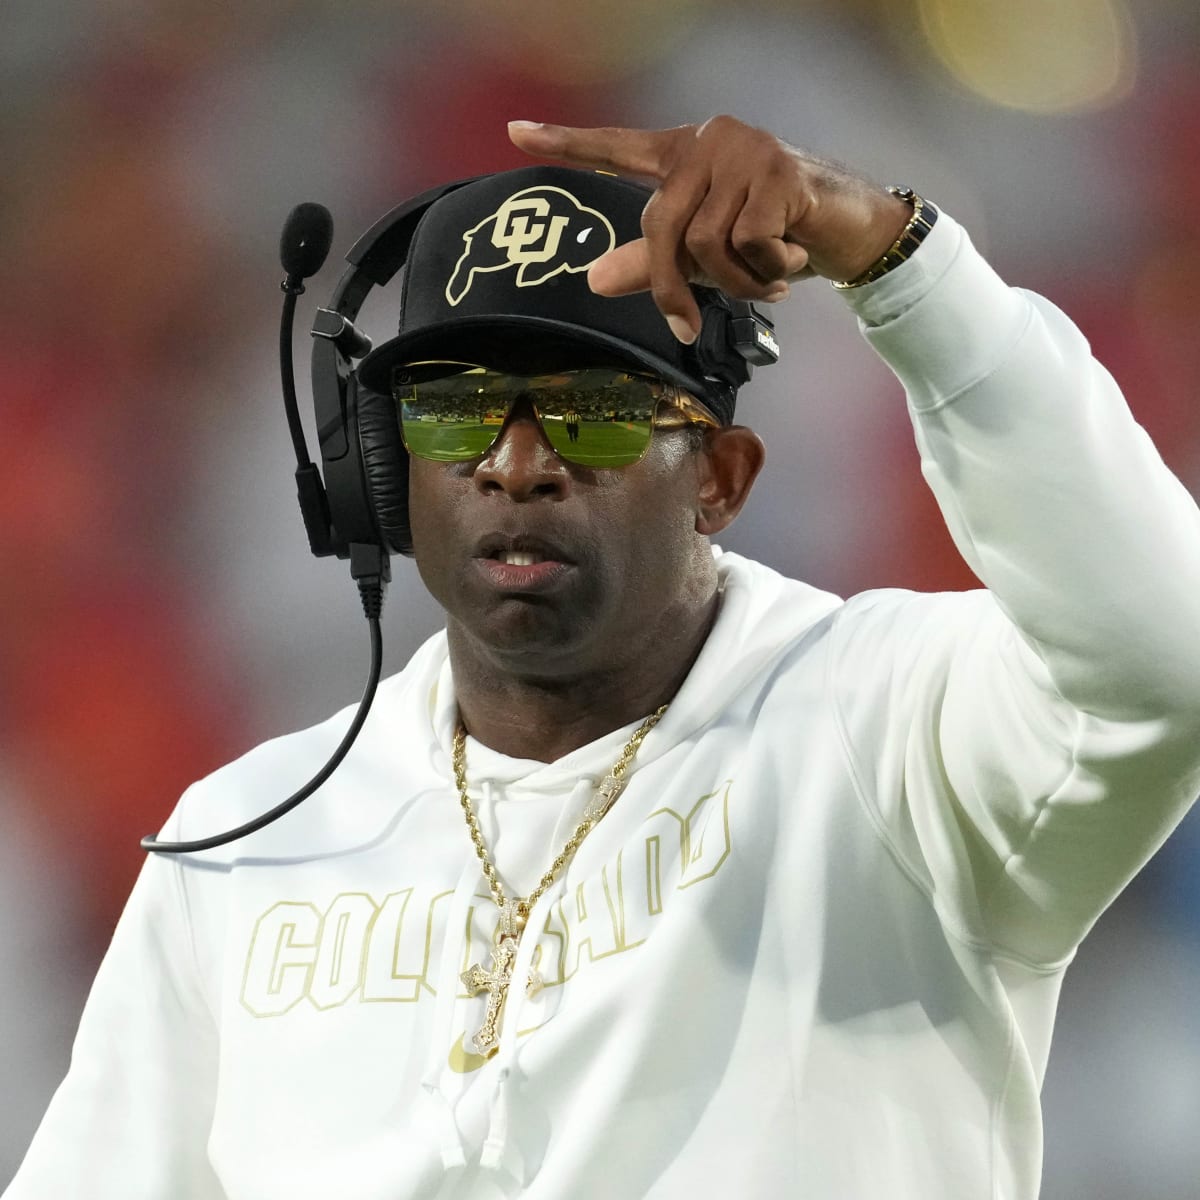 Deion Sanders: Jackson State's new football coach is former Reds OF